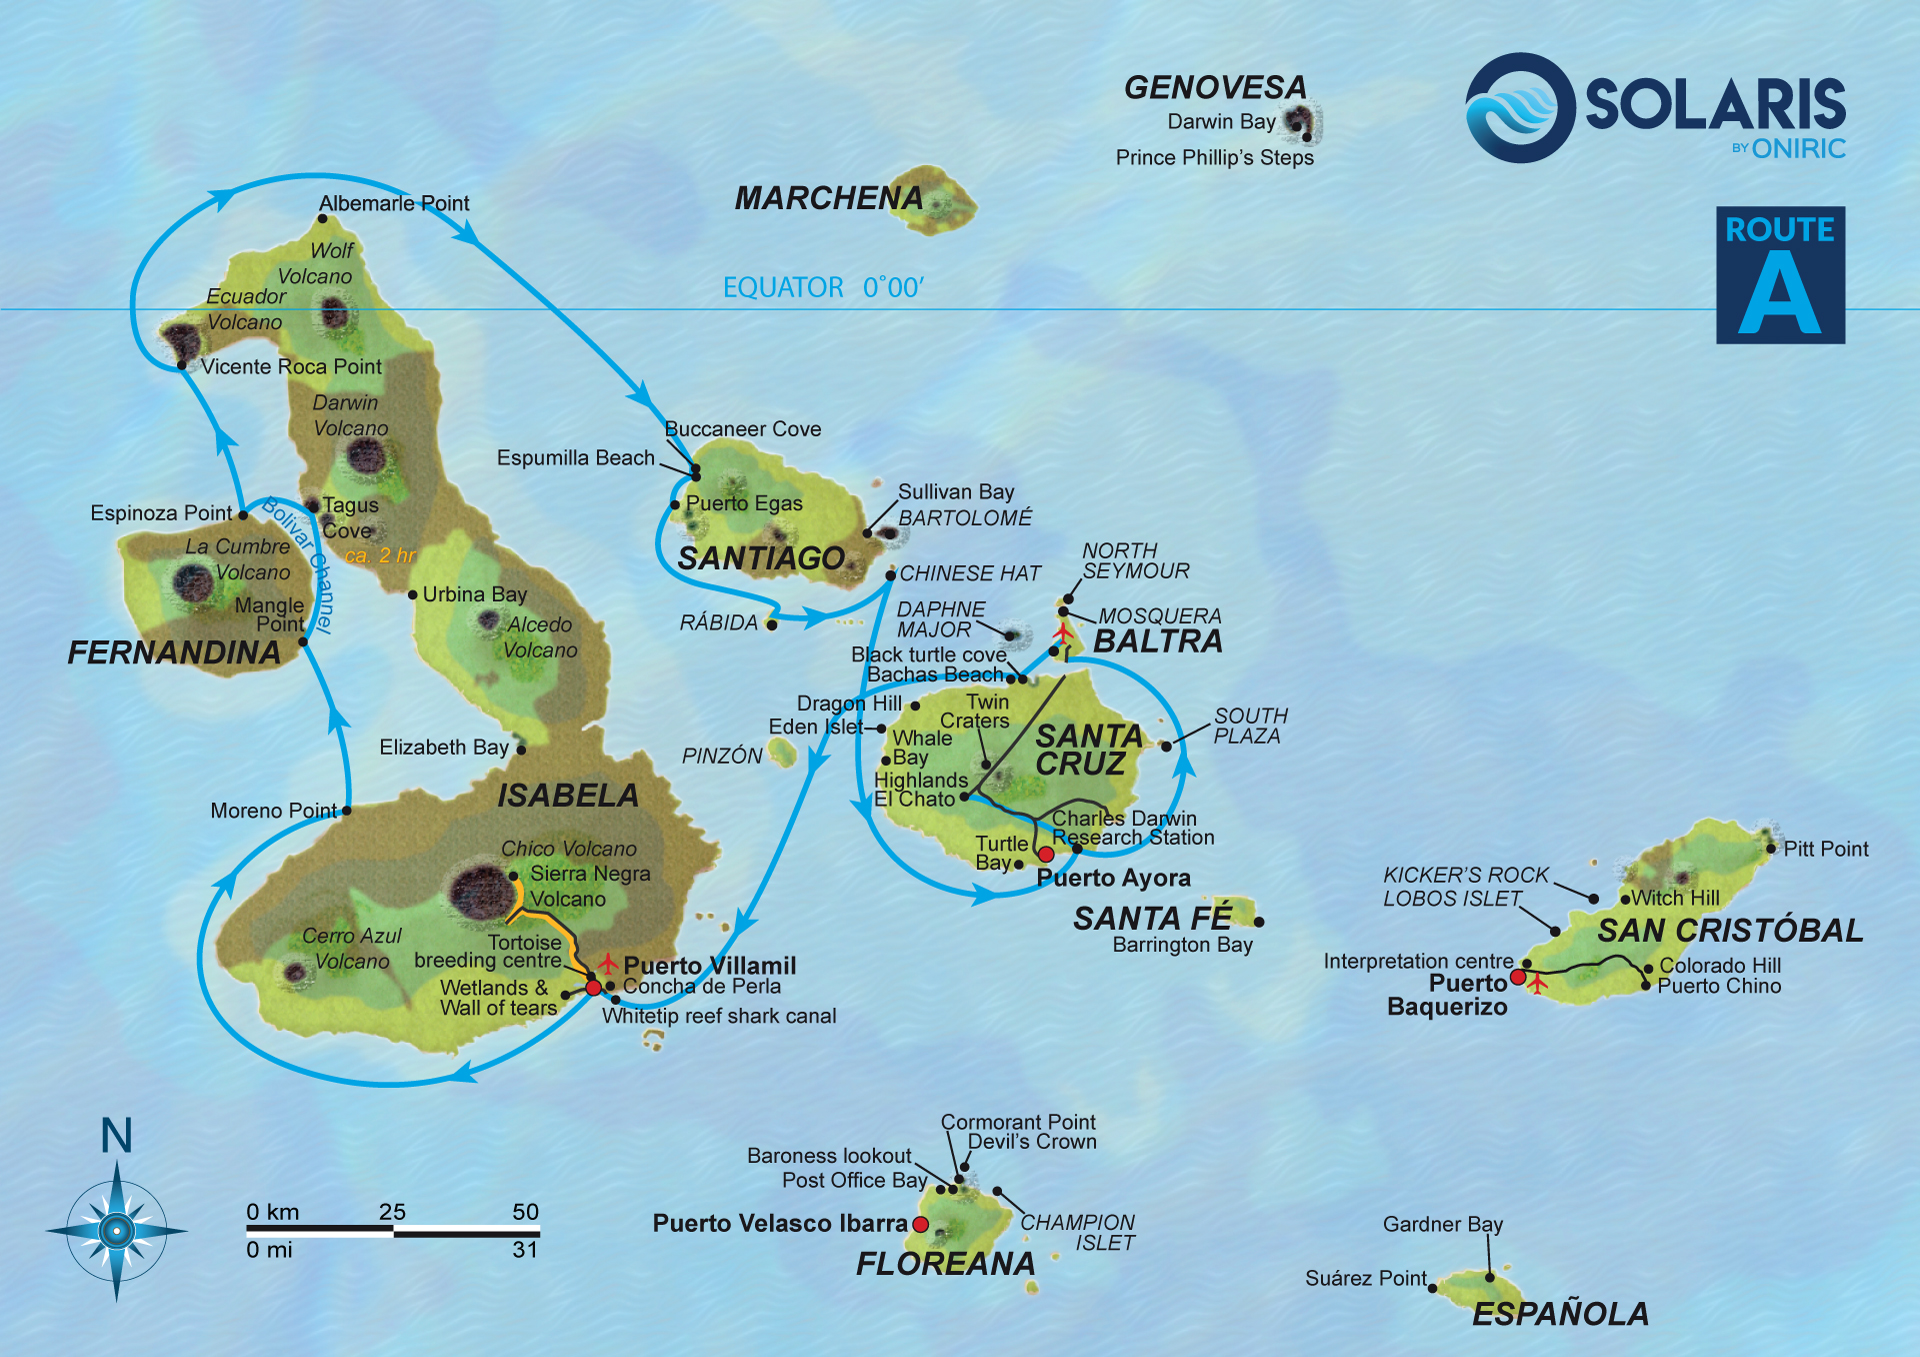 Galapagos Yacht M/Y Solaris Cruise Itinerary A route map